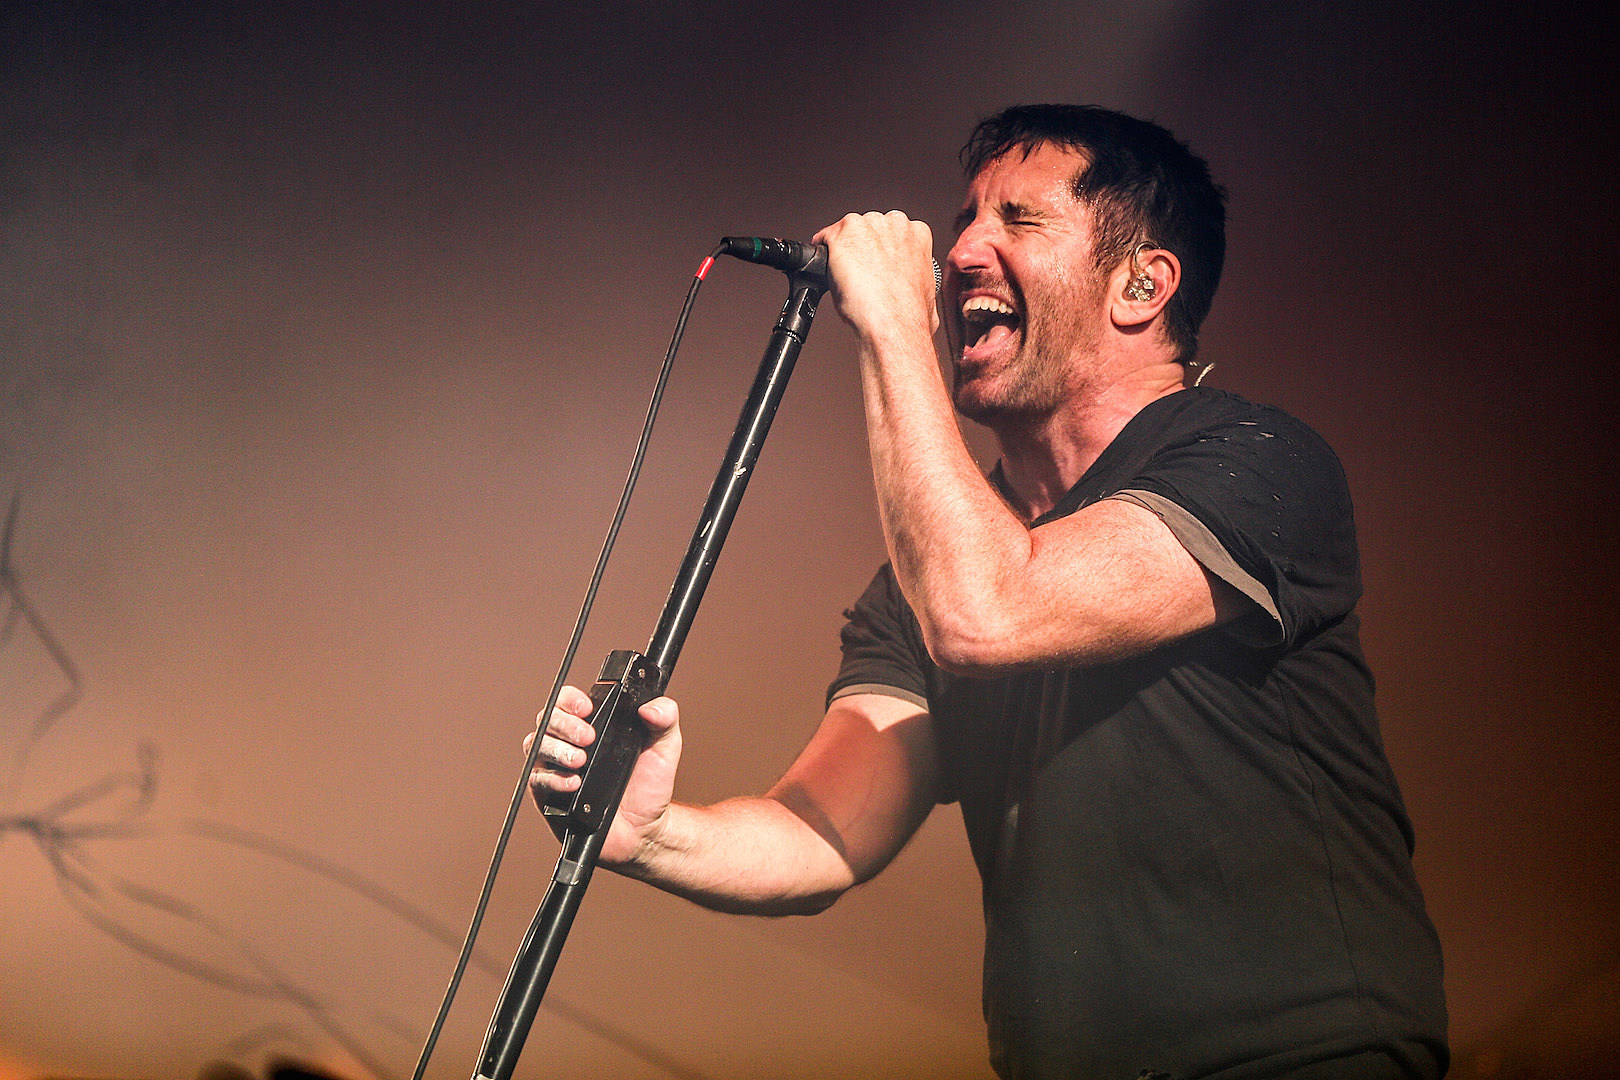 Poll: What’s the Best Nine Inch Nails Album? – Vote Now